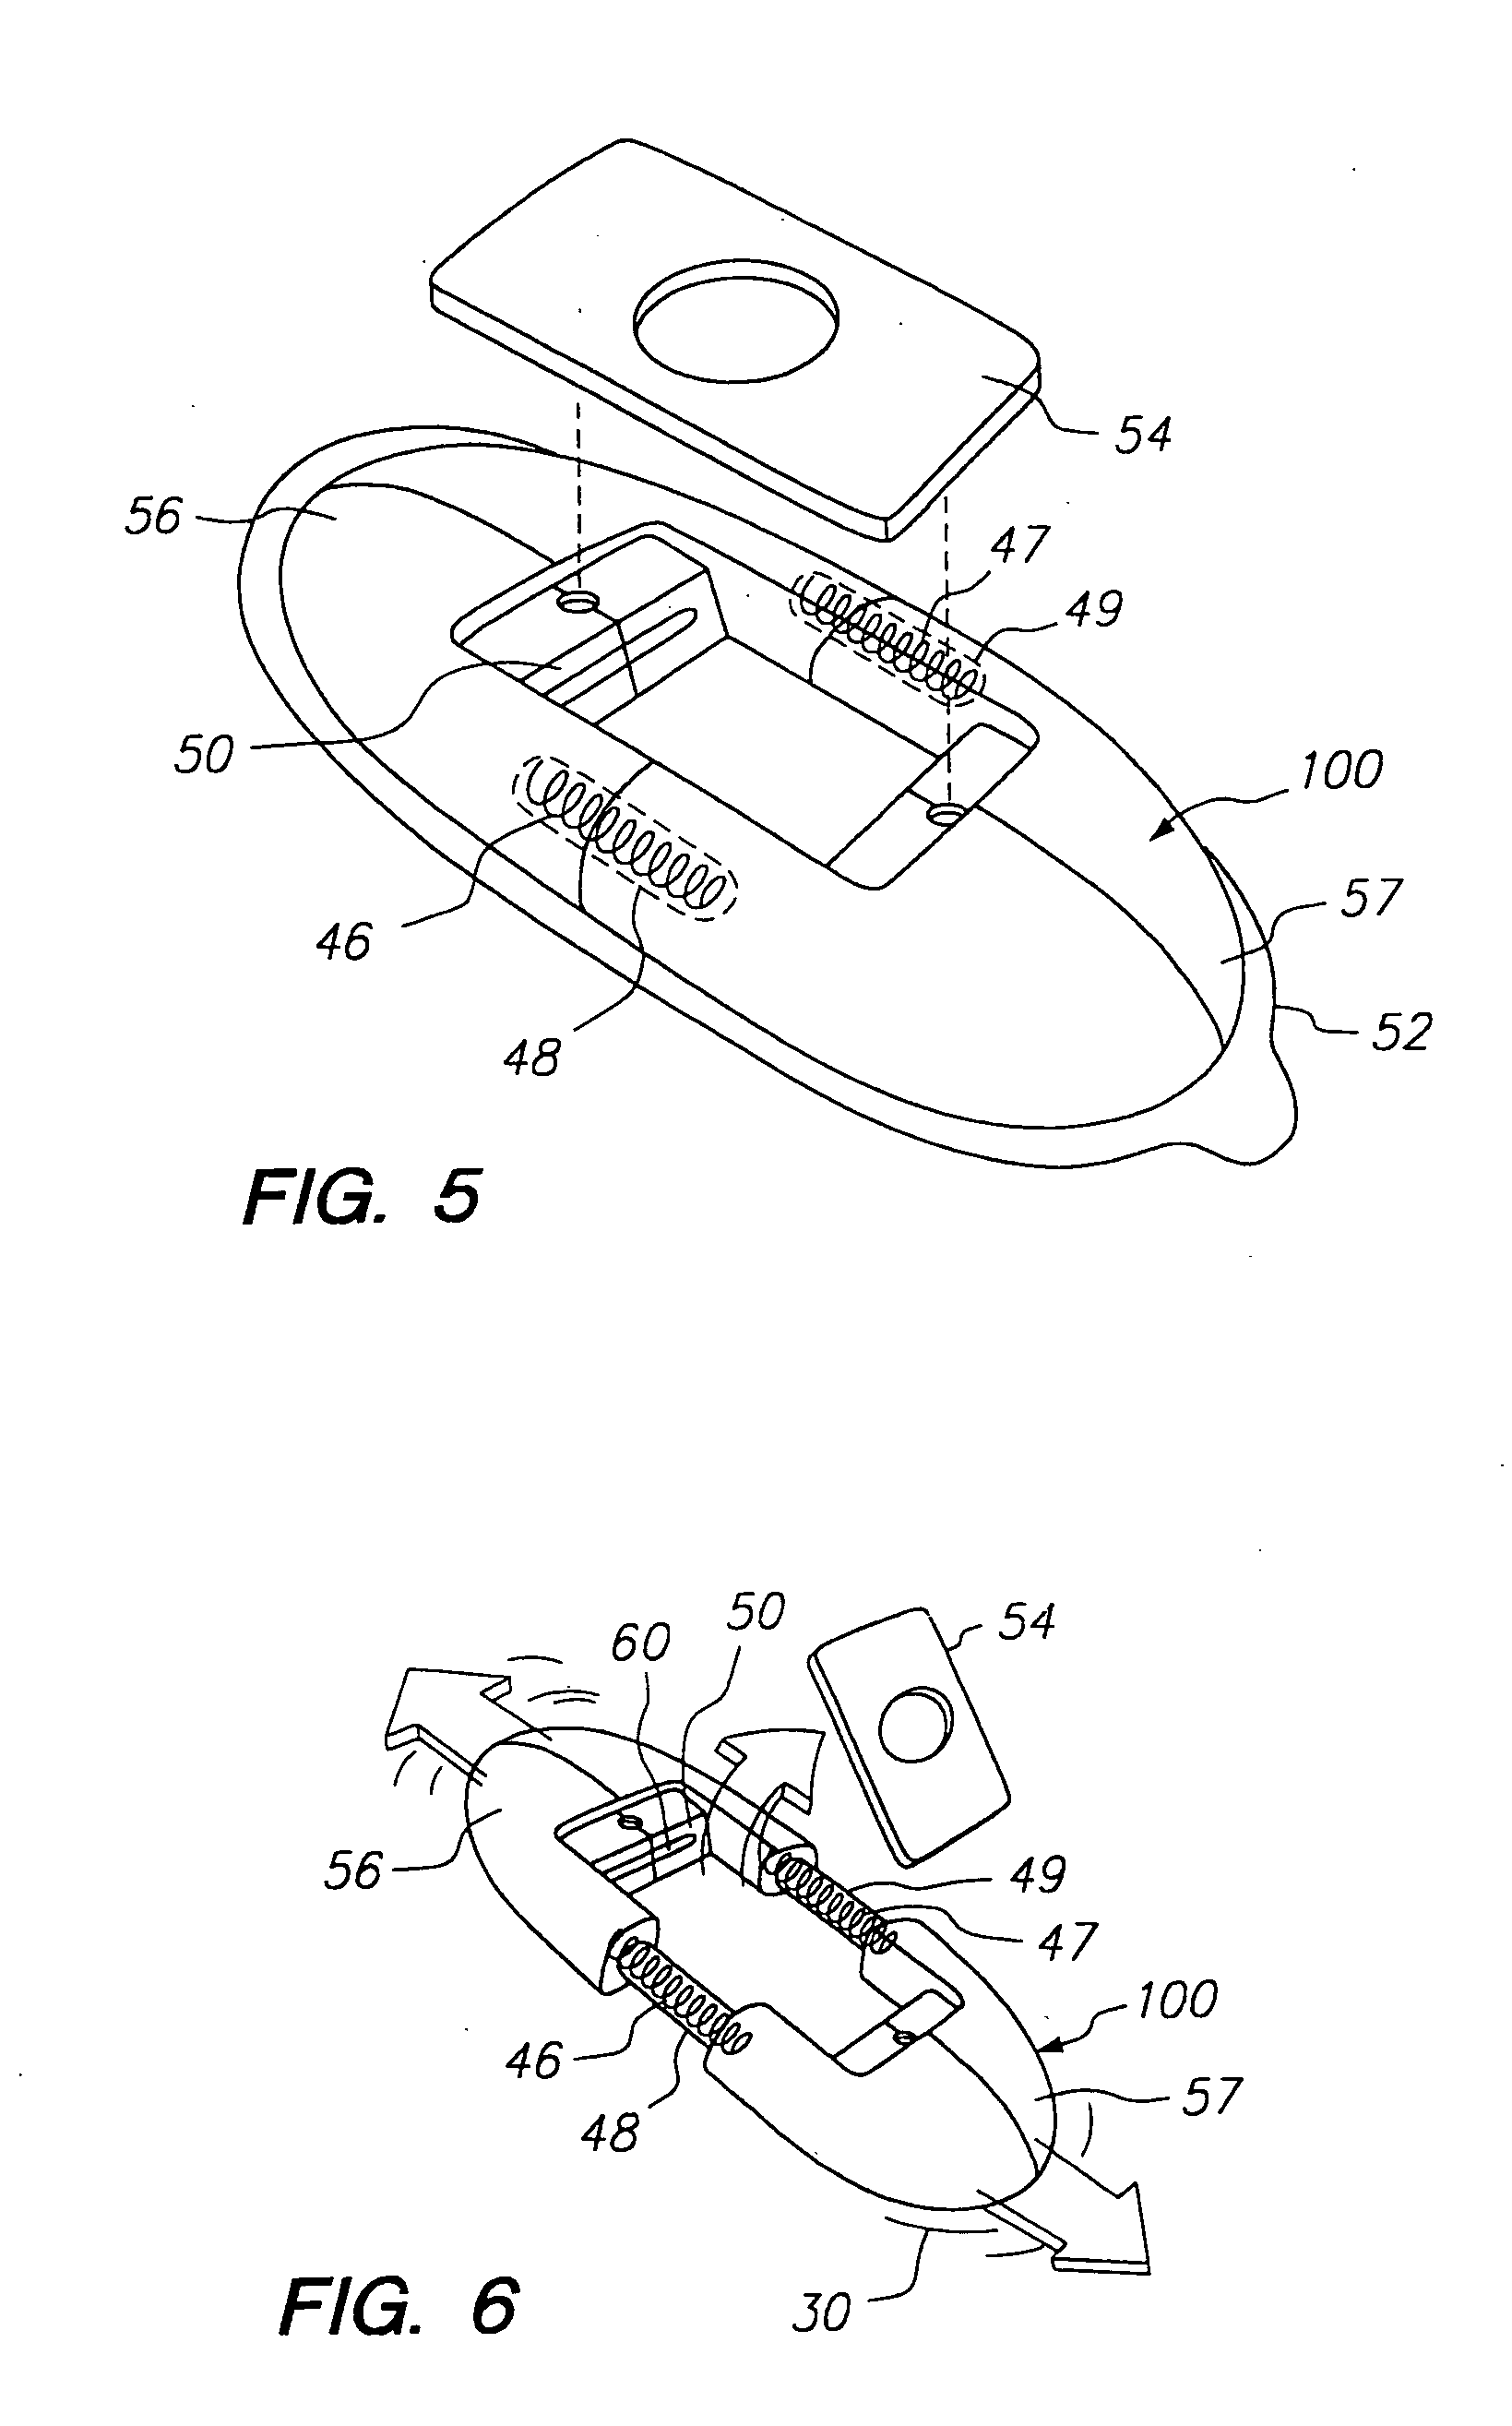 Device and method for enhancing skin piercing by microprotrusions